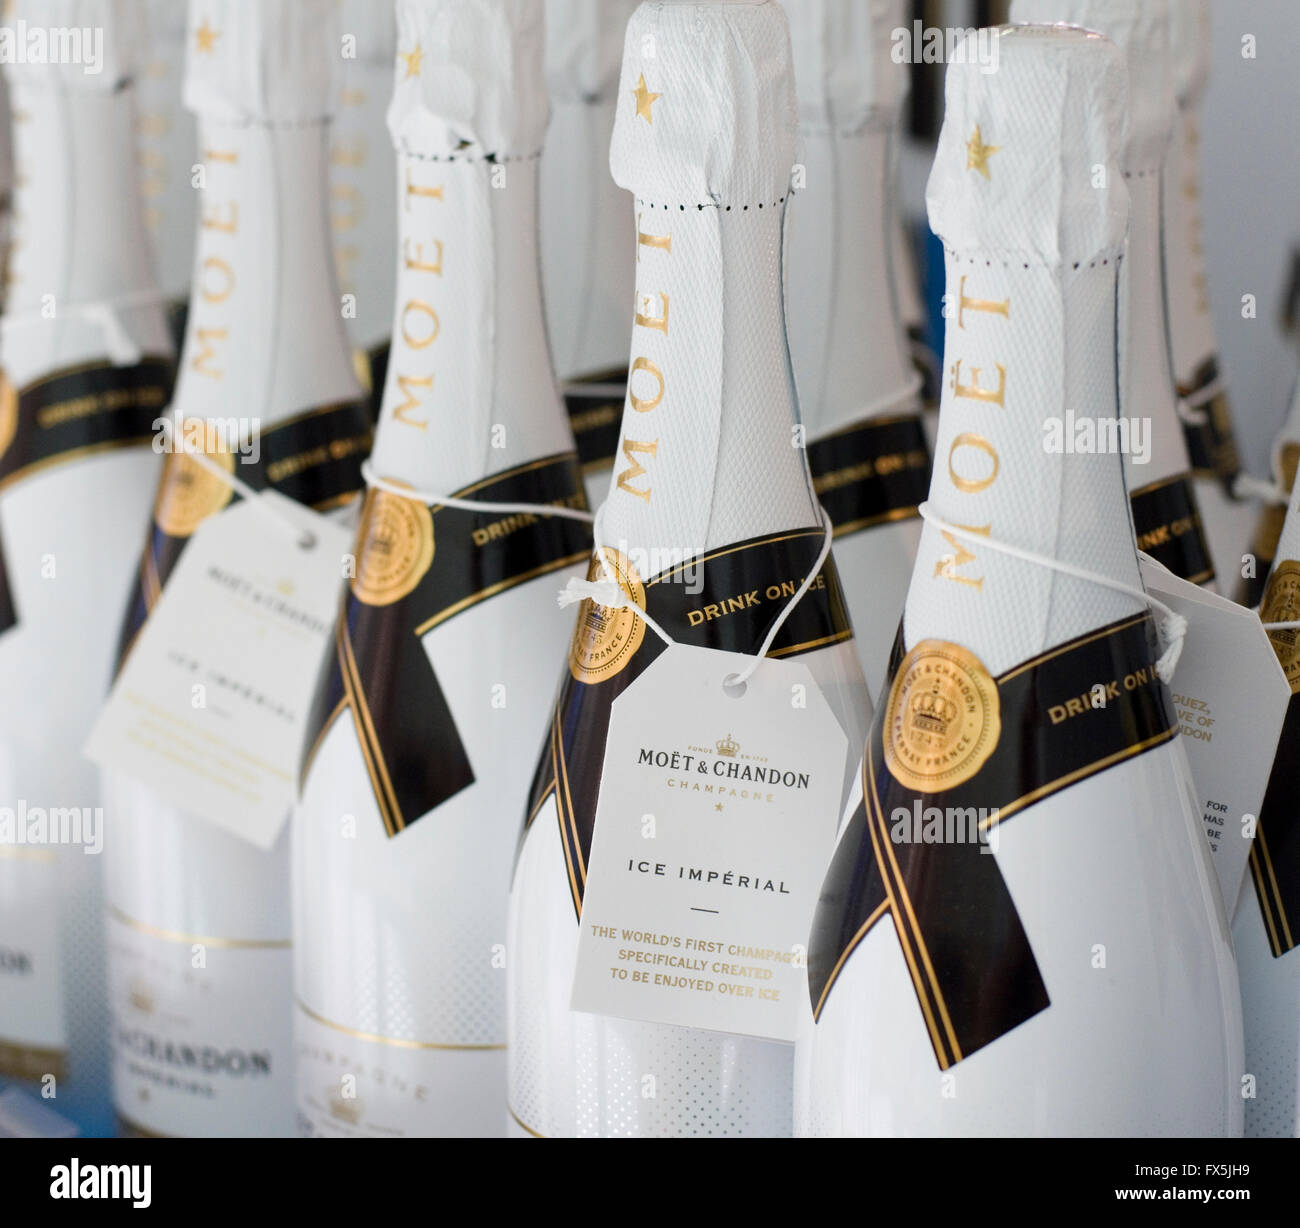 Rows of Moet Et Chandon champagne bottles. Ice Imperial - designed to be drunk over ice. Stock Photo